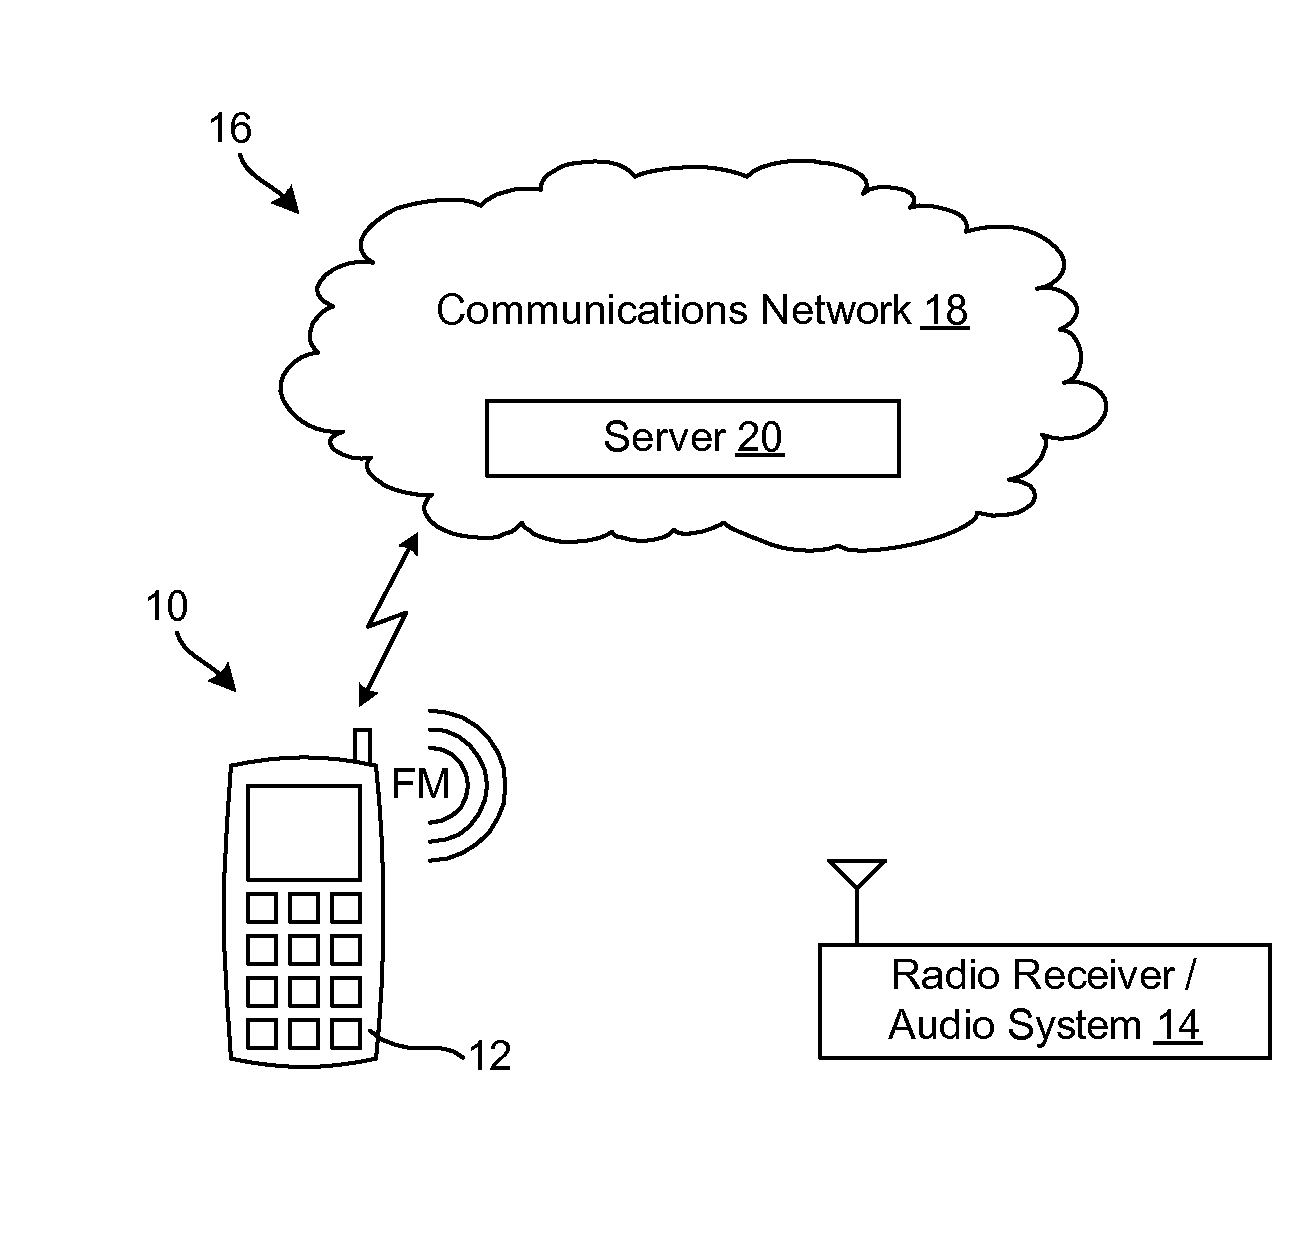 System and method for broadcasting an alert